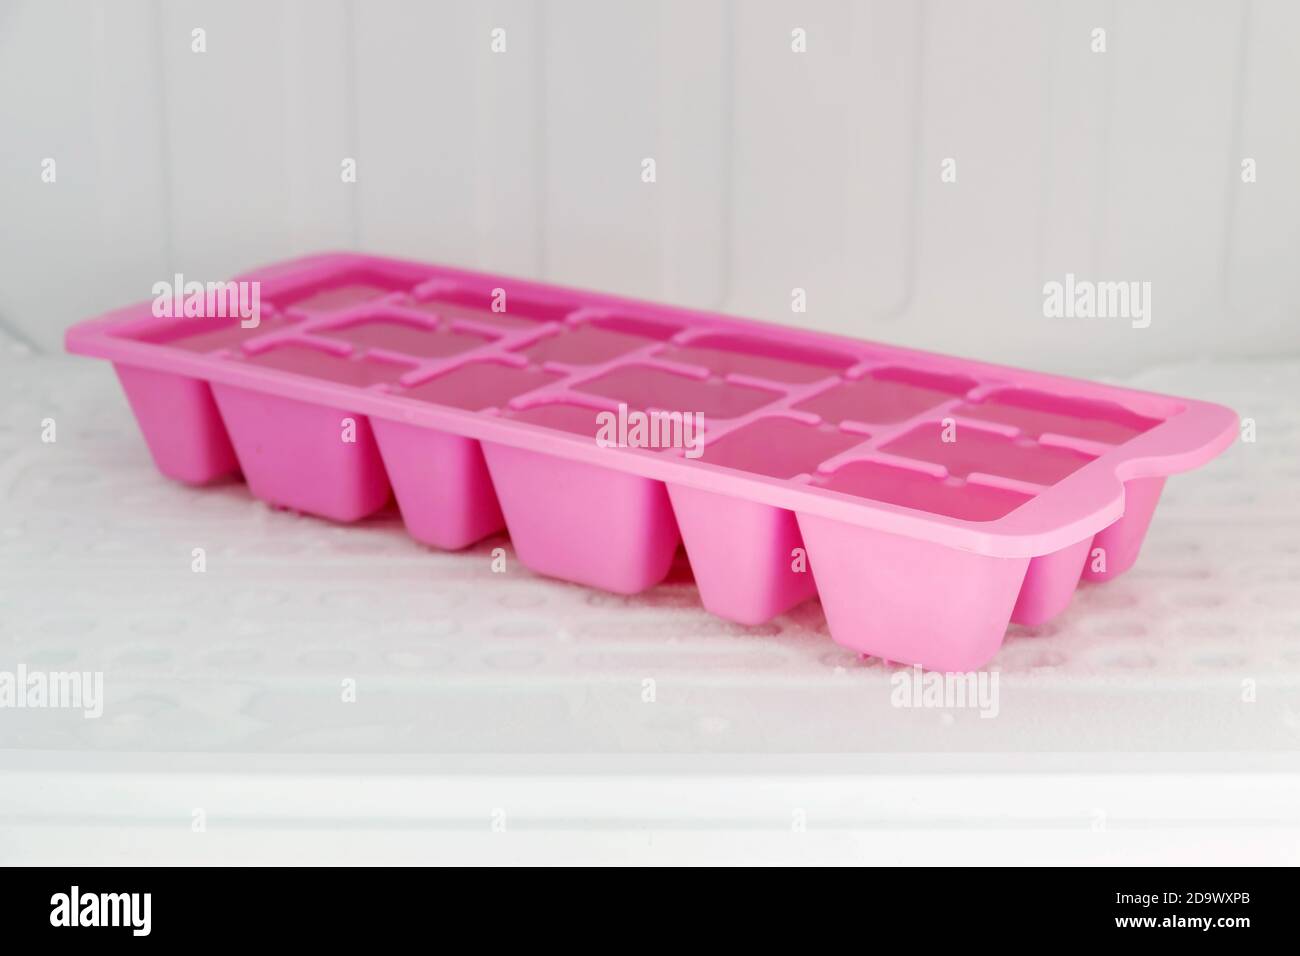 https://c8.alamy.com/comp/2D9WXPB/colorful-plastic-ice-tray-in-the-freezer-compartment-of-the-refrigerator-2D9WXPB.jpg